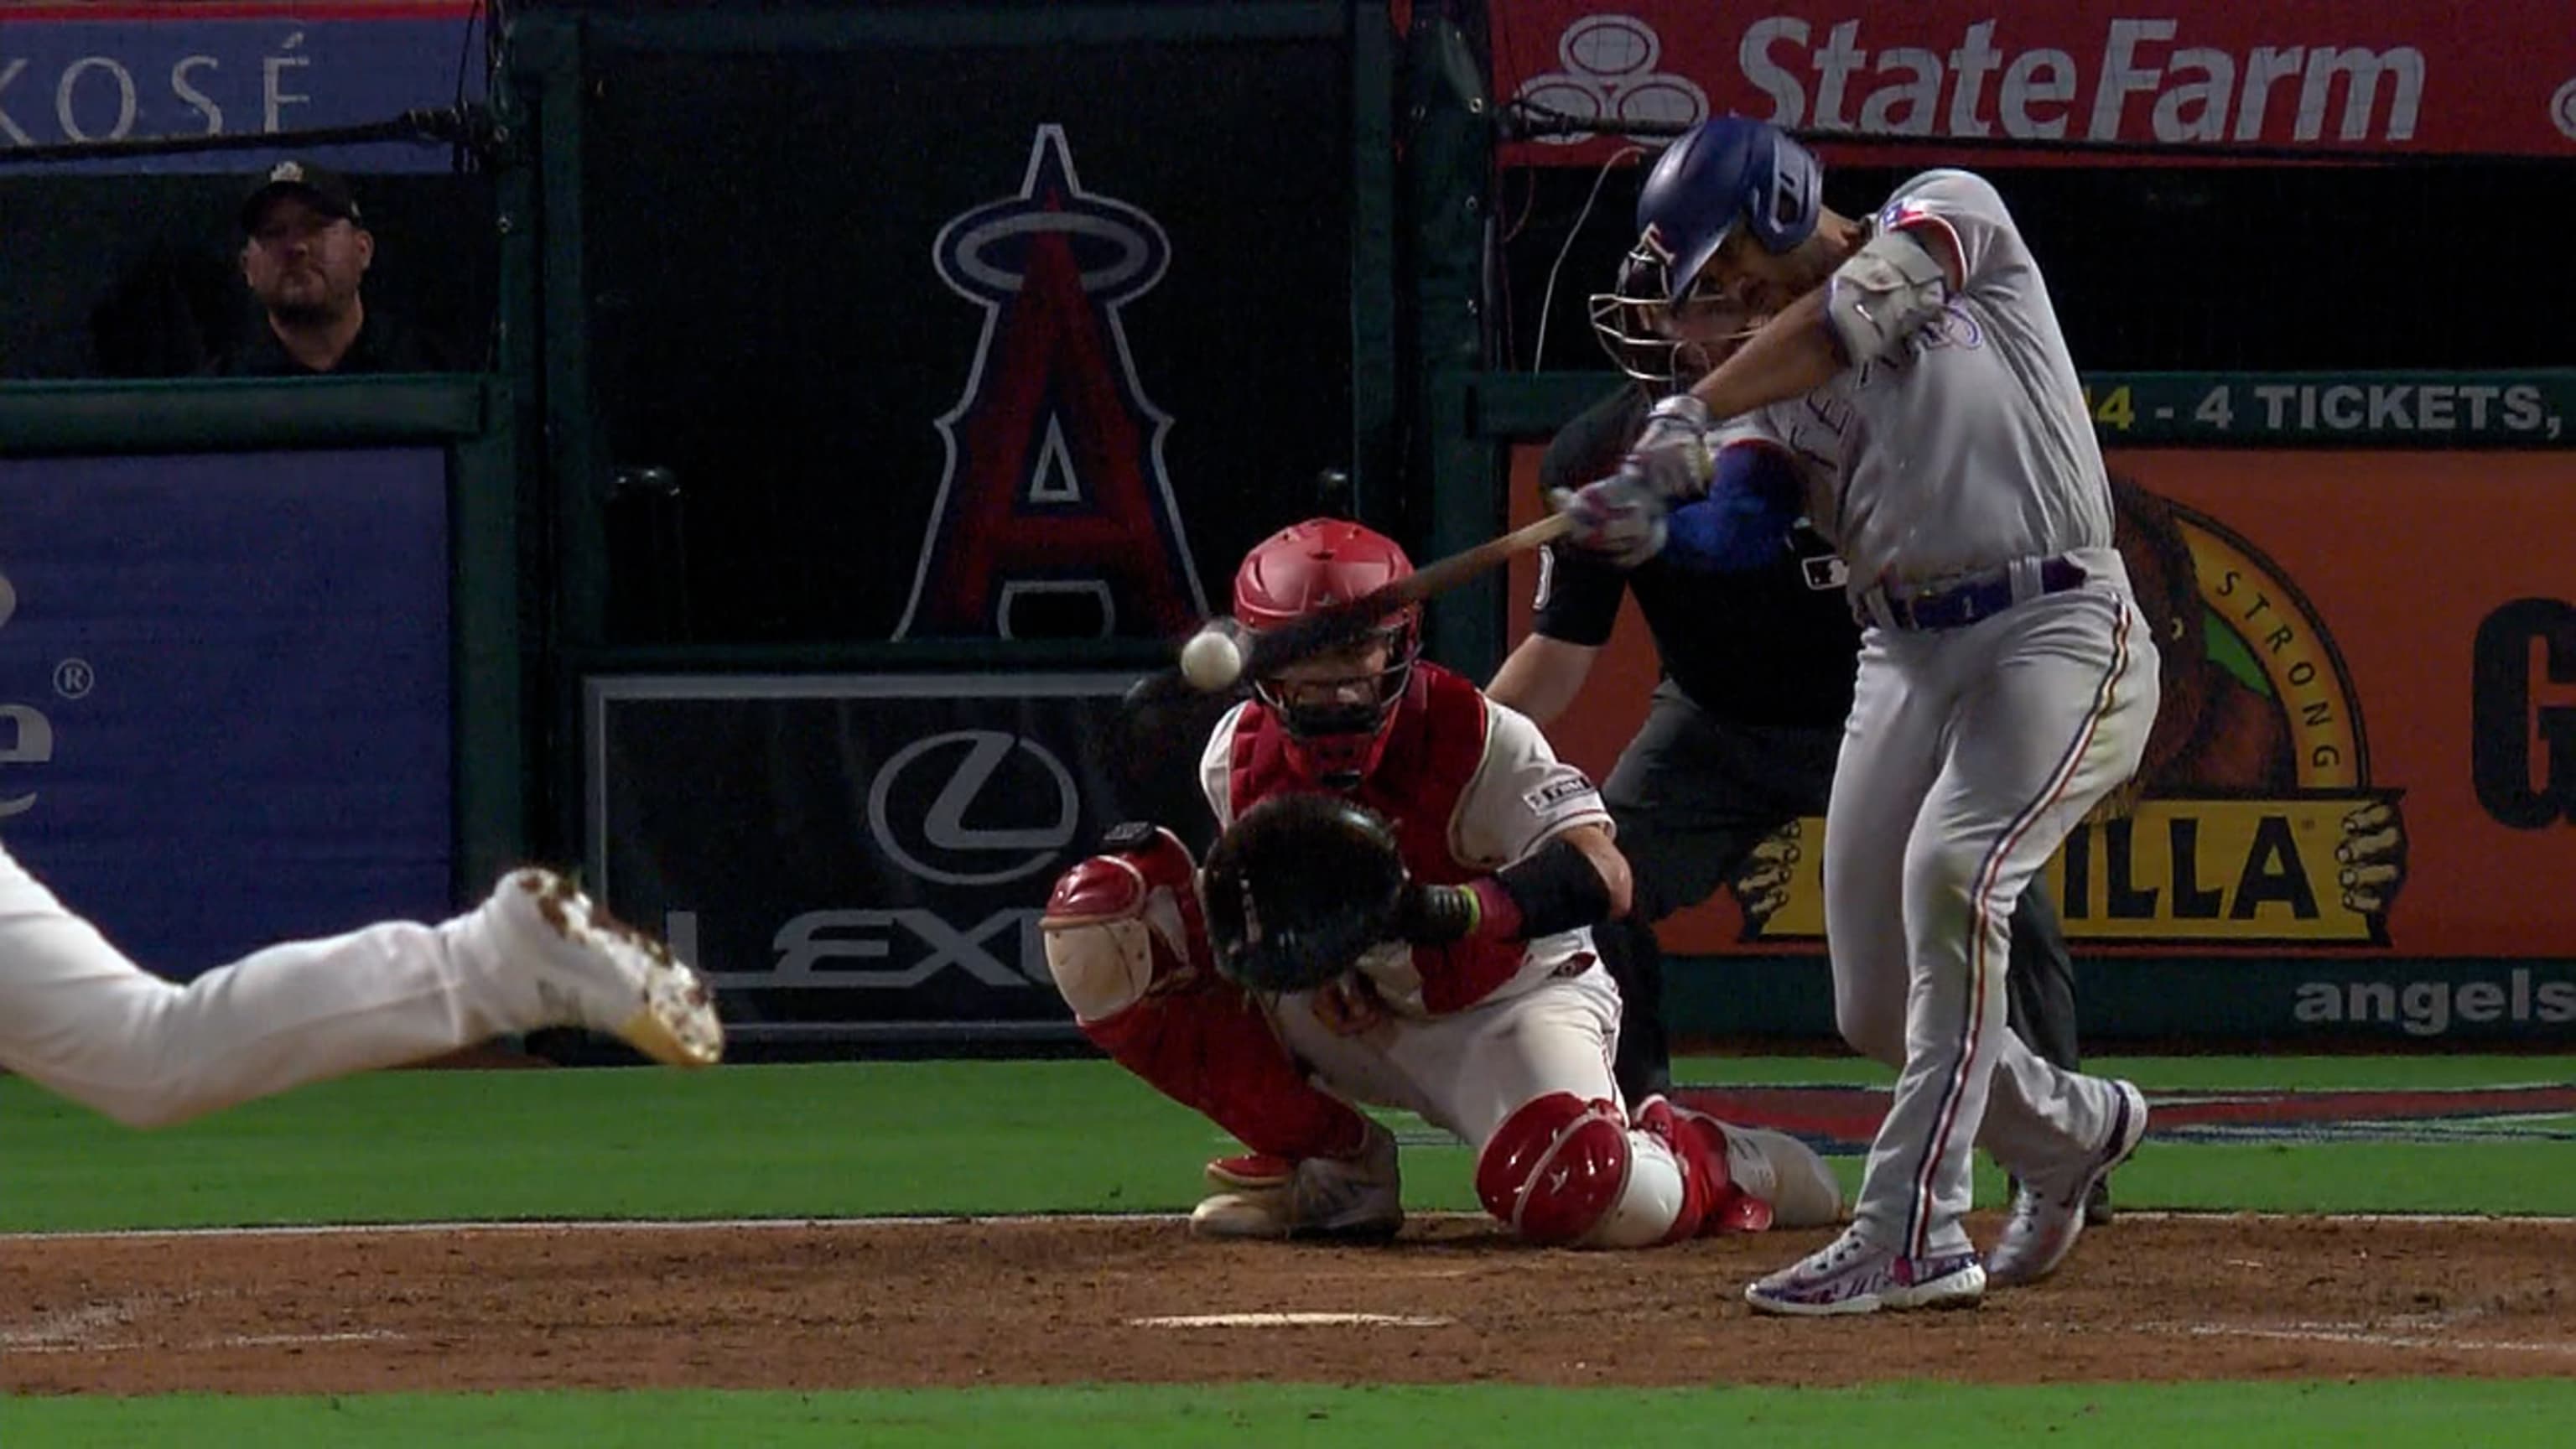 Rangers back Gray with 3 straight homers, beat Angels 5-1 to